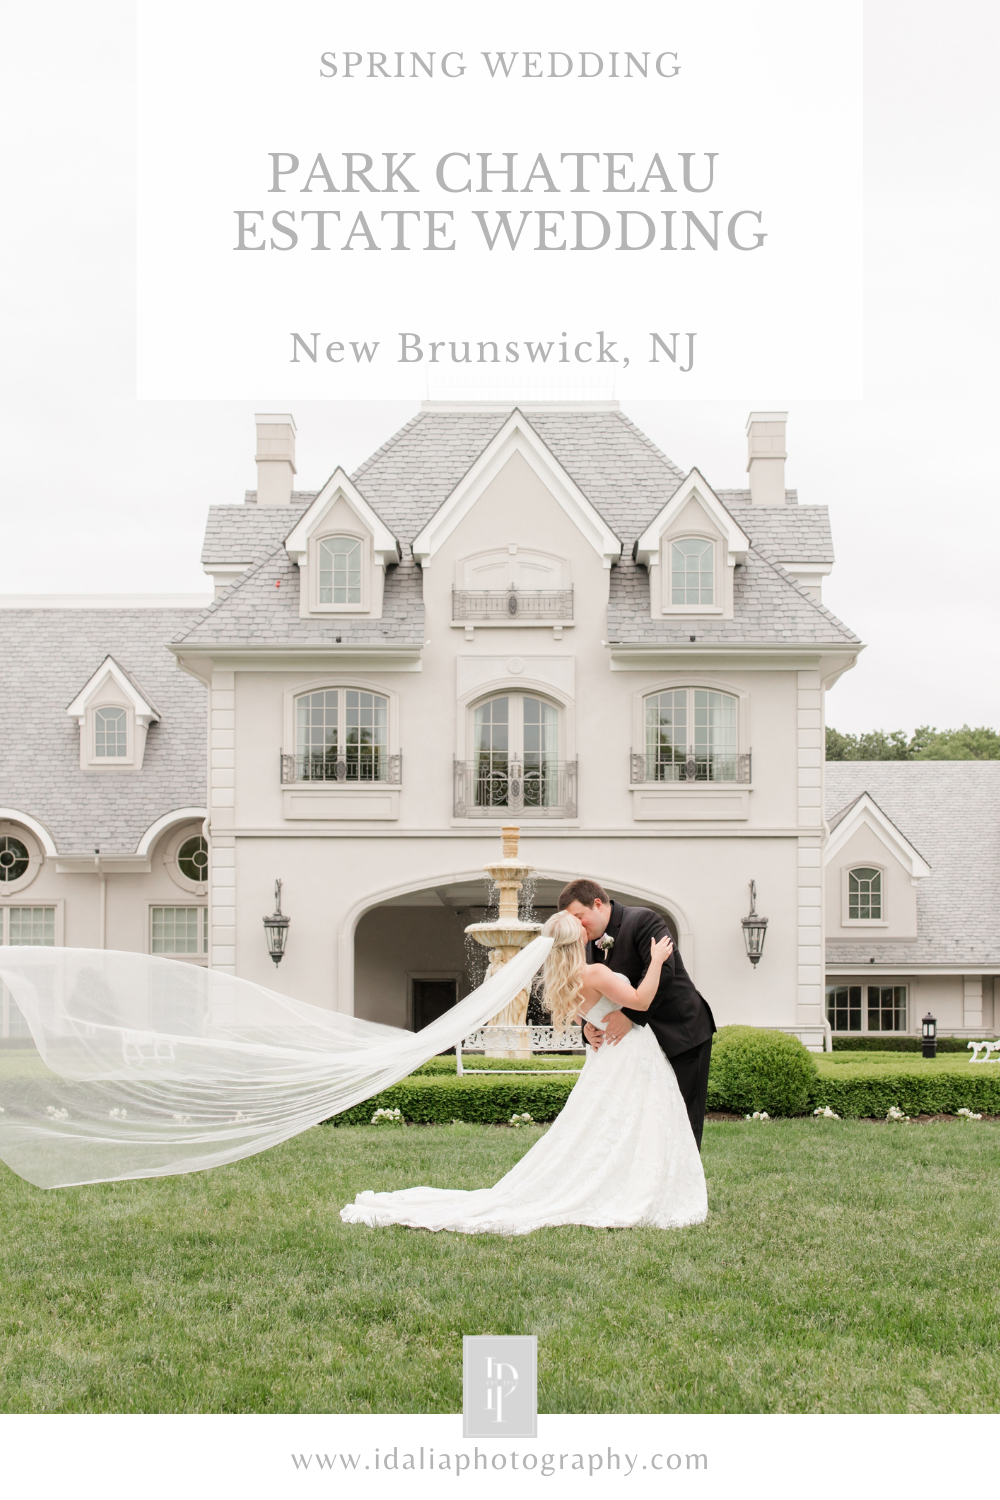 Park Chateau Estate wedding in the spring